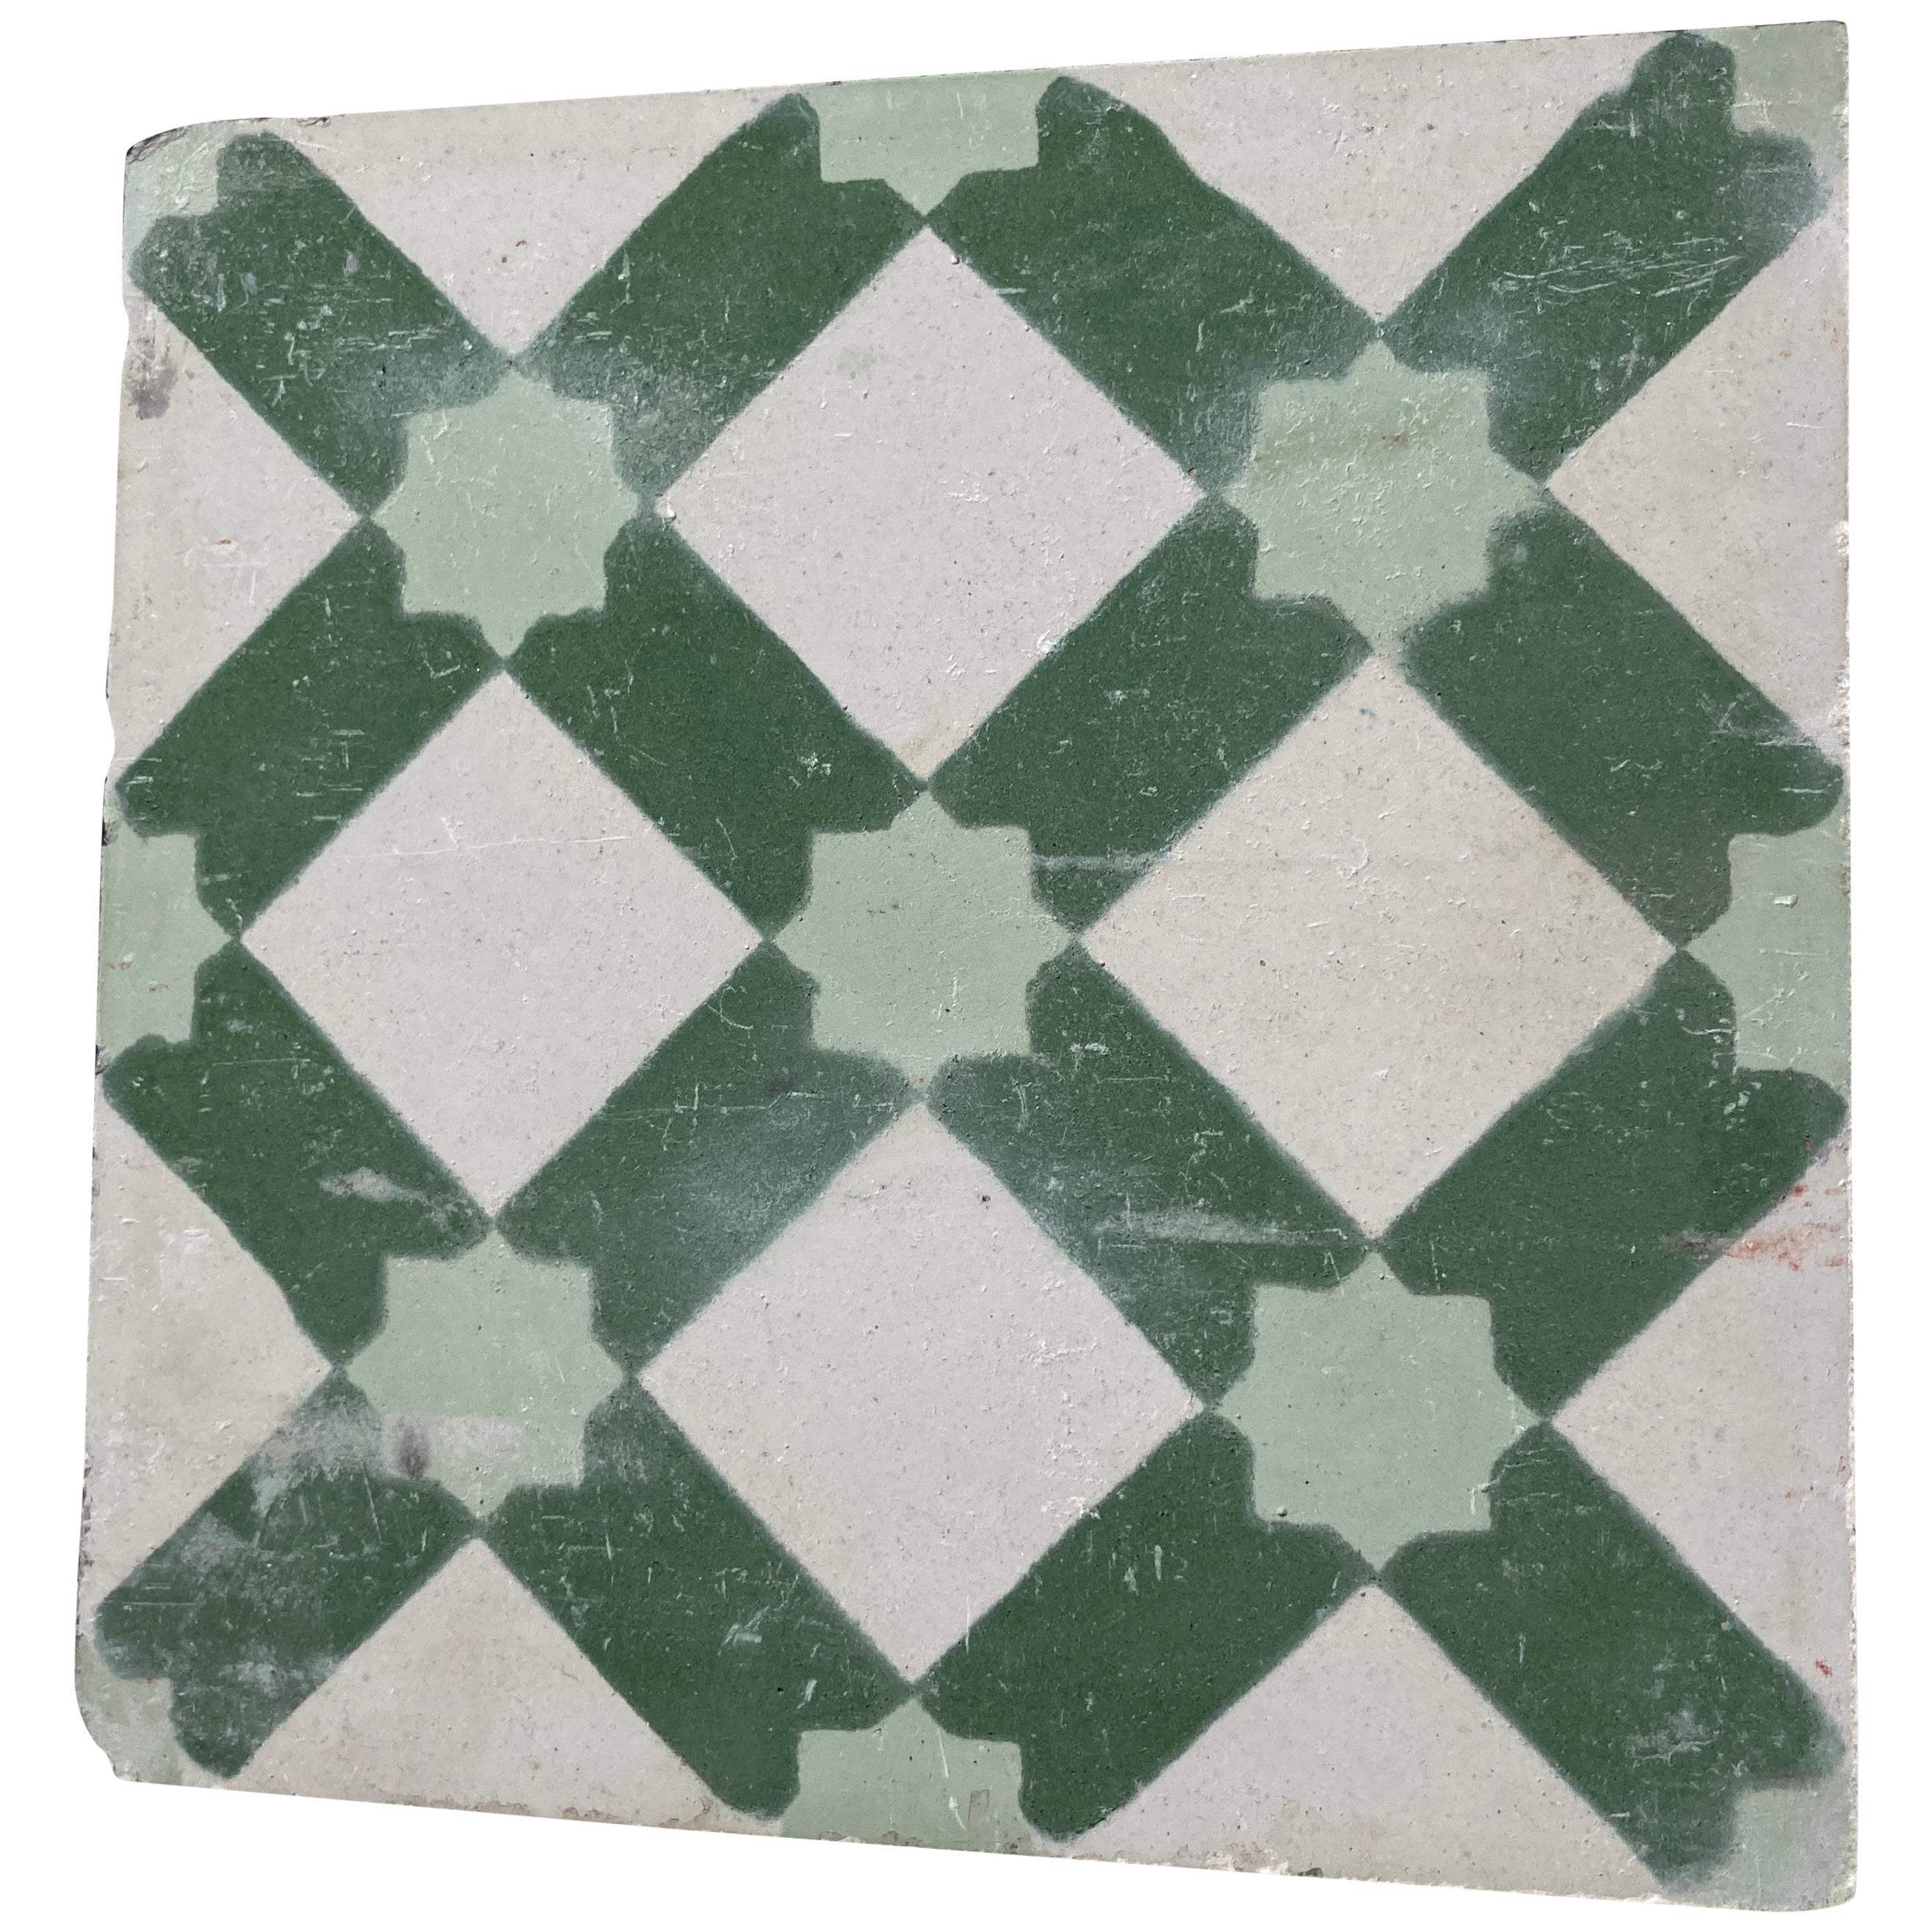 Set of four Moroccan handcrafted cement tile with traditional Green Moorish design. 
These are authentic Moroccan encaustic tiles hand made by artisans in Fez Morocco. 
This is the traditional Moroccan star design. 
These are handmade cement